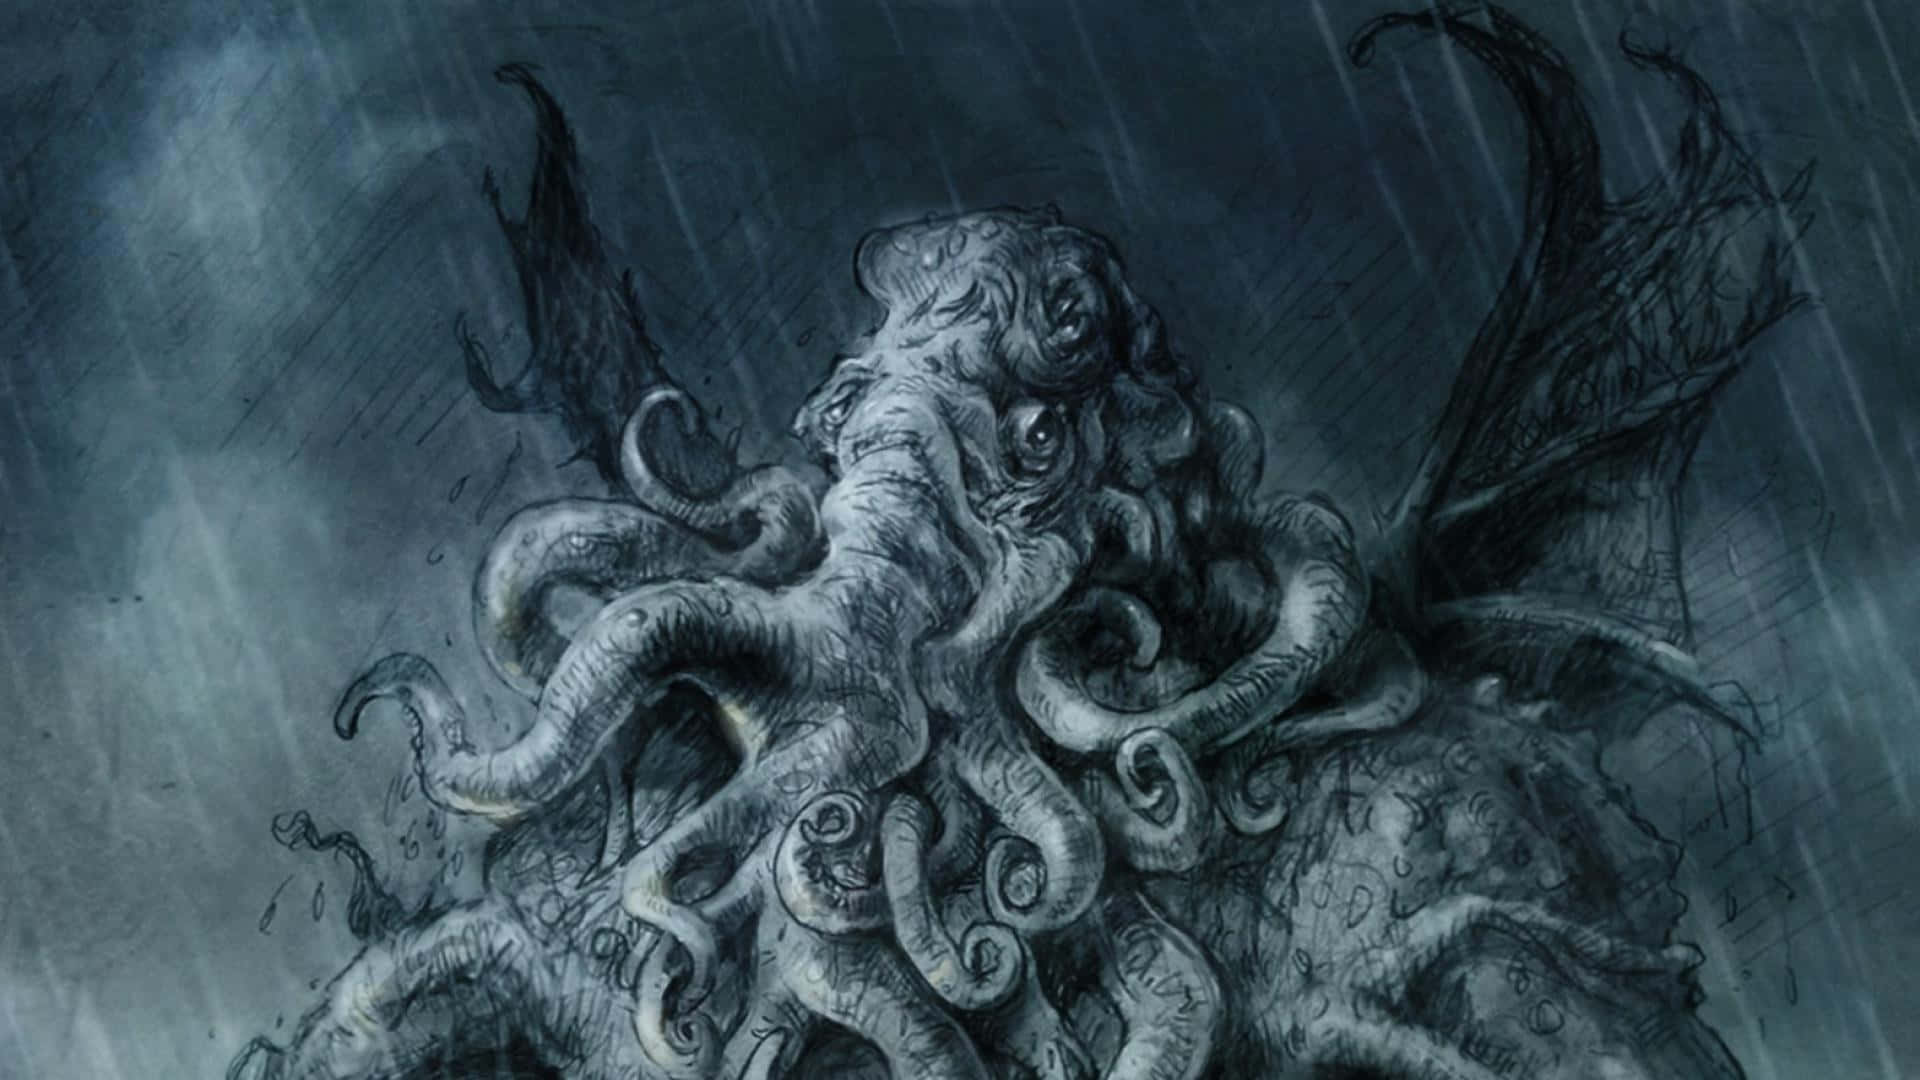 "The fearsome and powerful Cthulhu rising from the depths of the ocean"